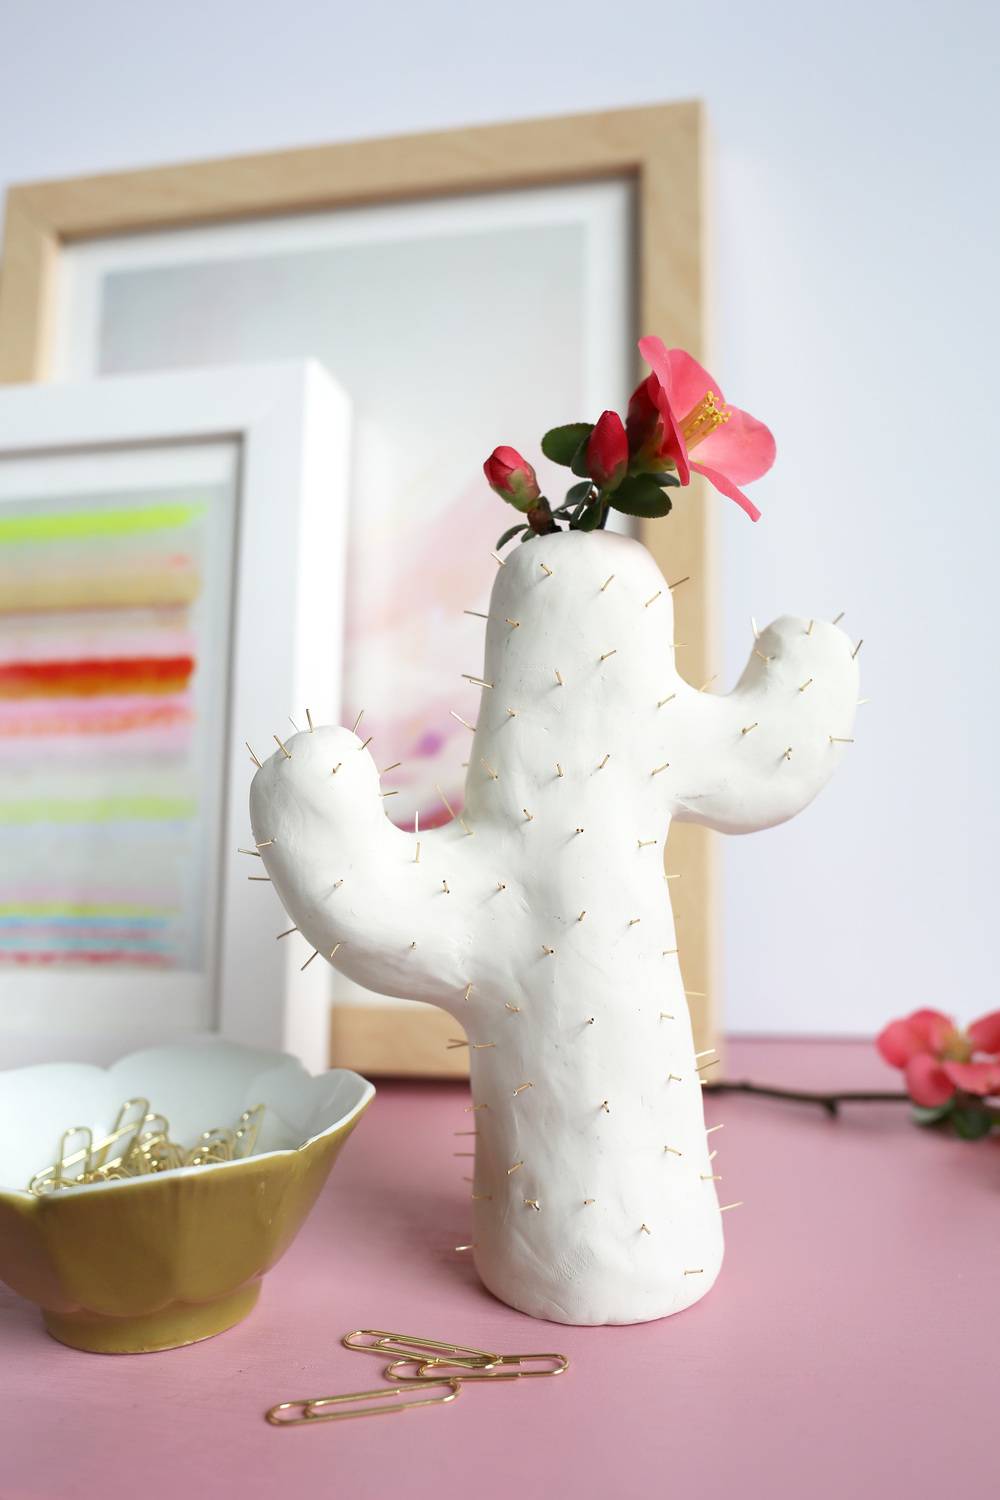 Tips for decorating with cactus